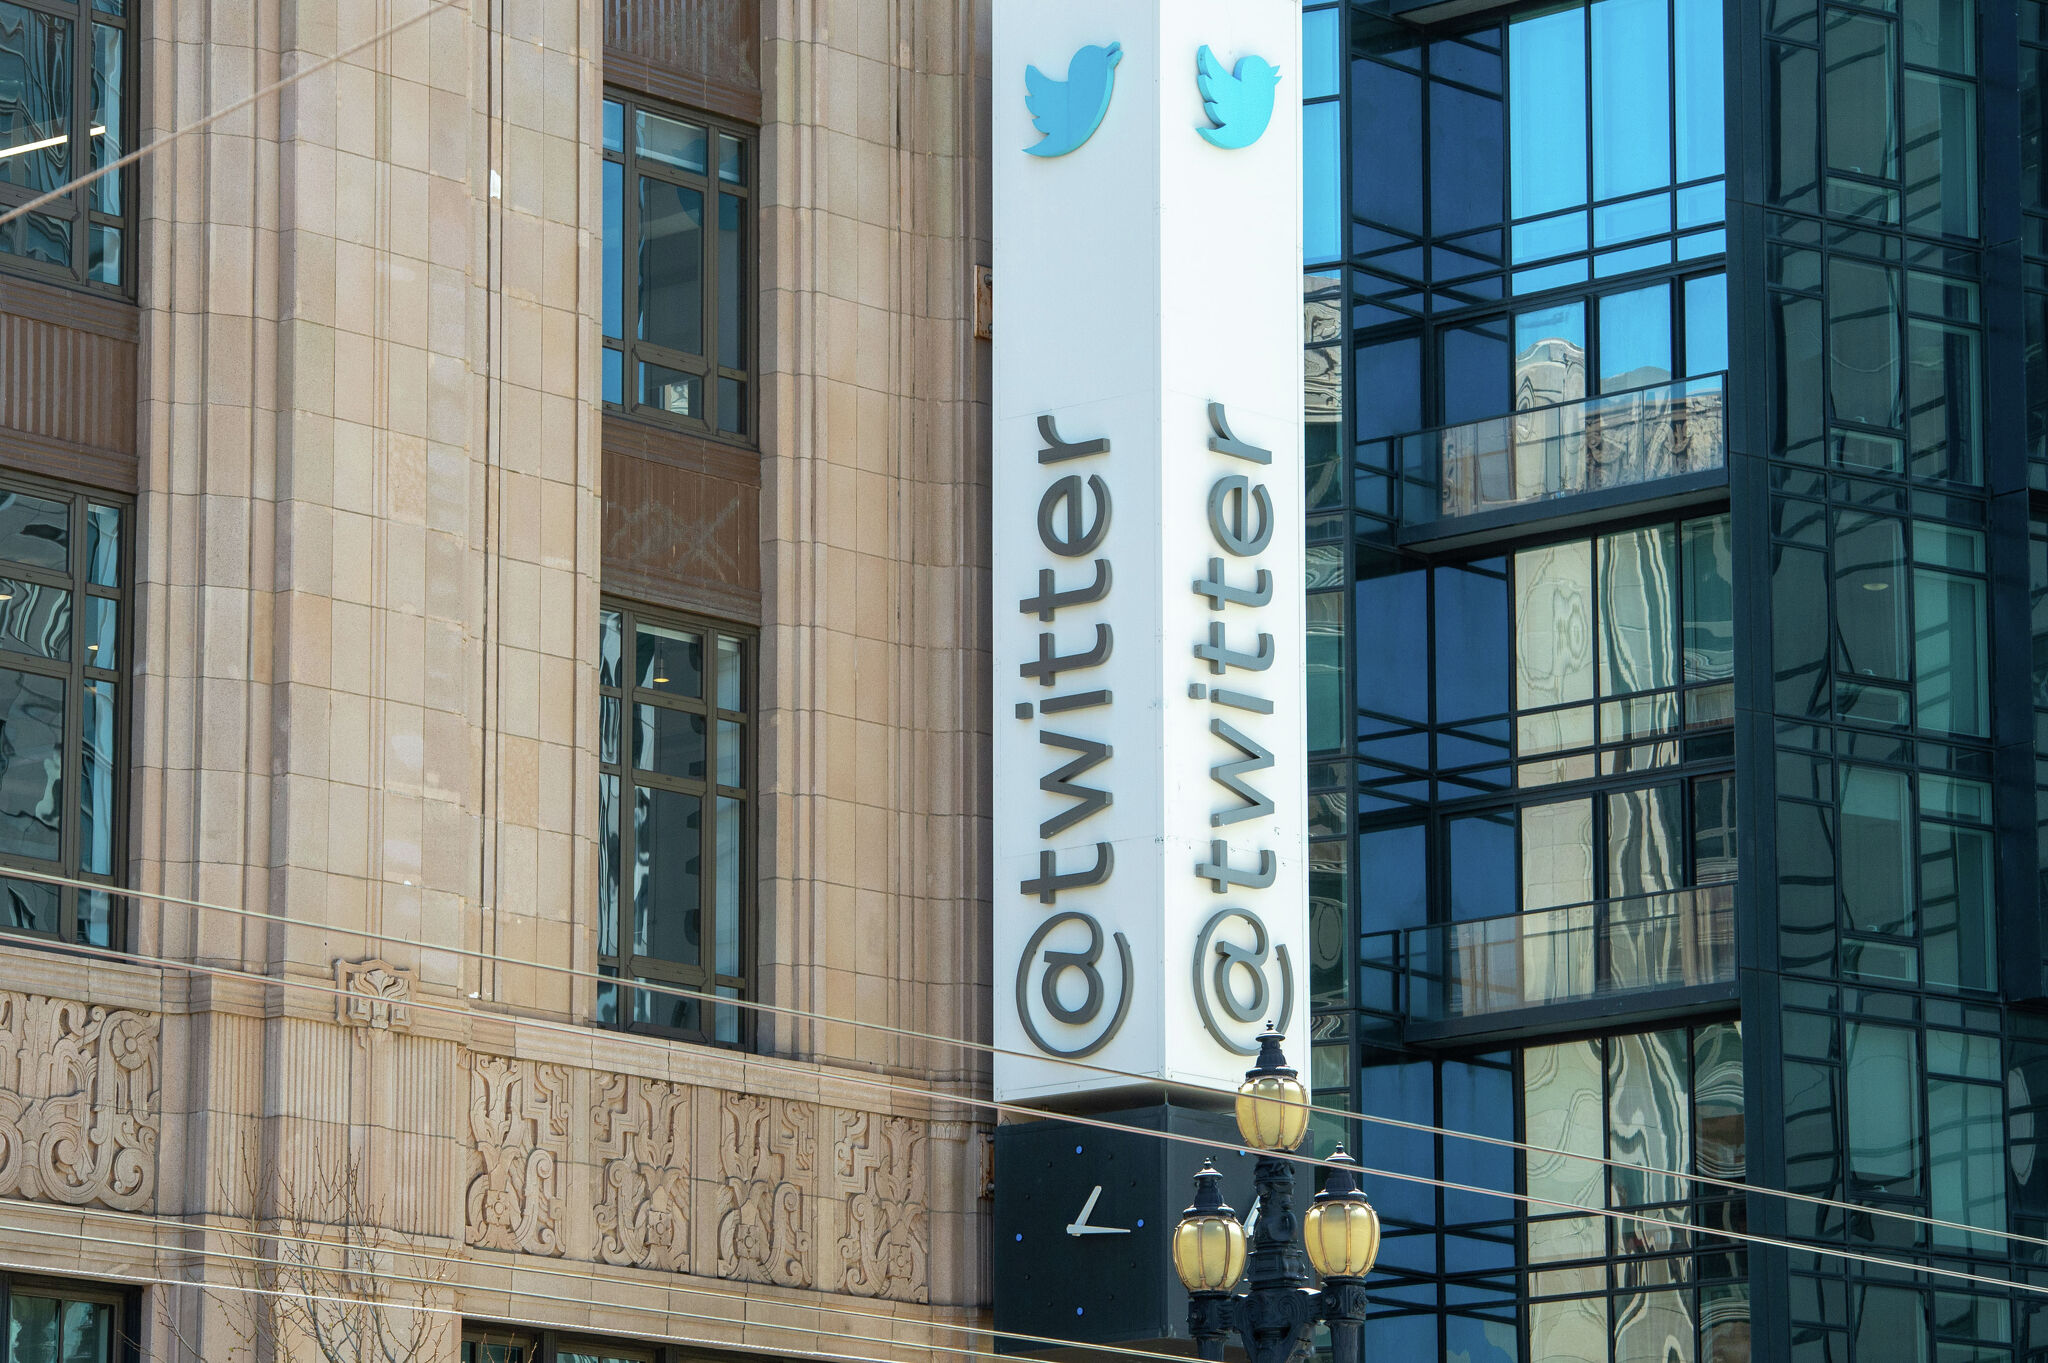 Musk lawyer said Twitter shouldn’t pay rent in ‘s—thole’ SF